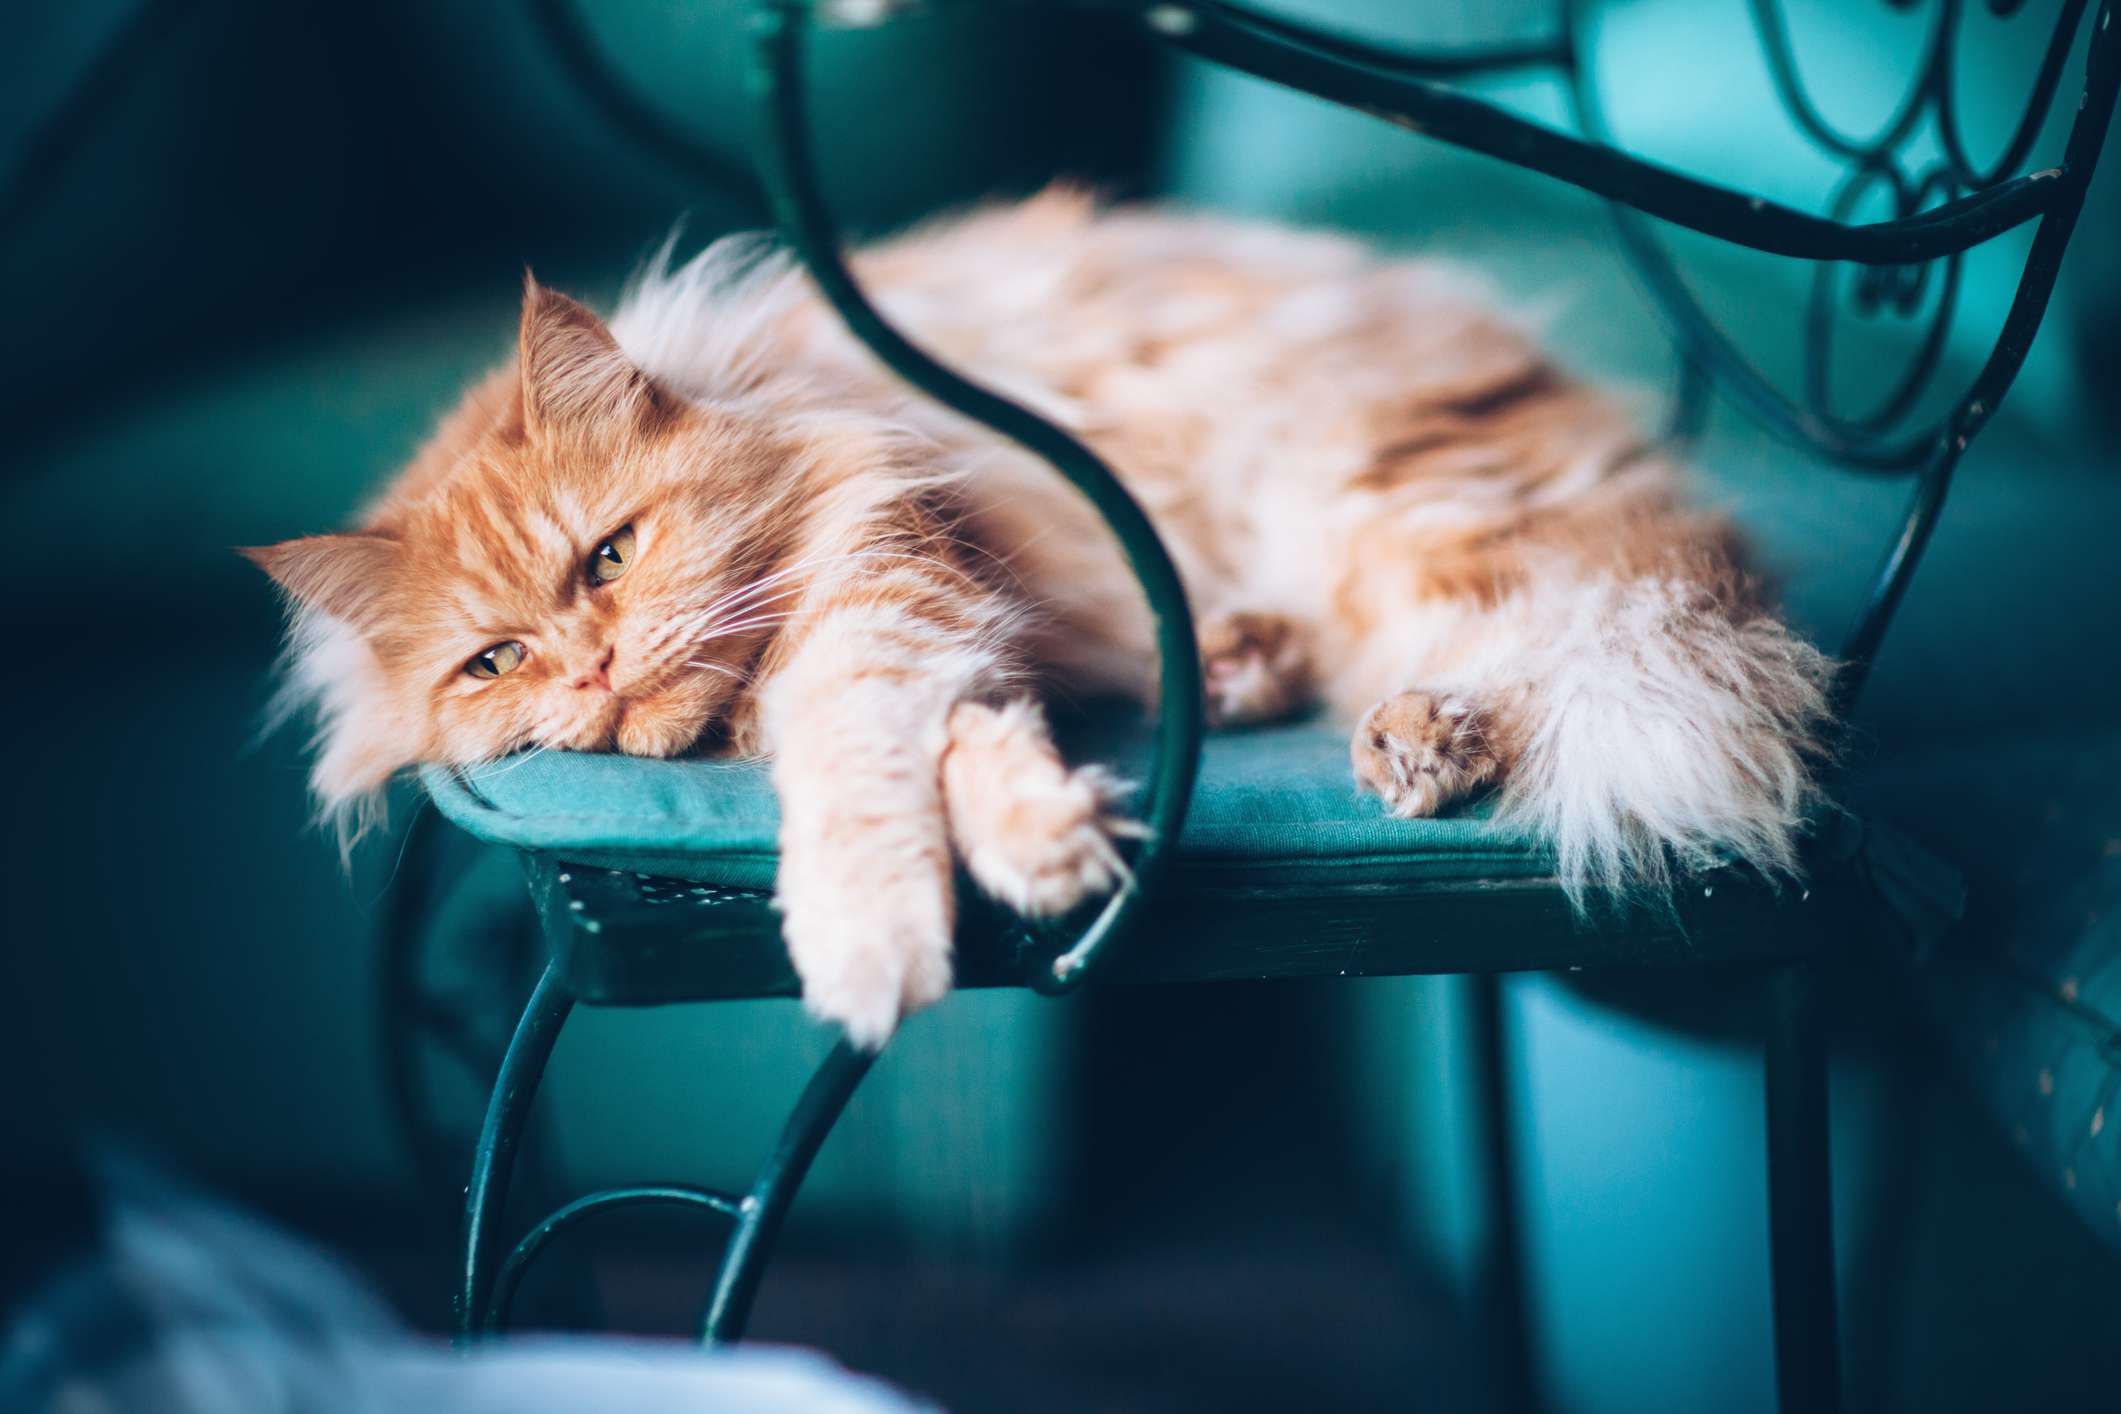 An orange cat with a smushed face sprawled out on a chair.